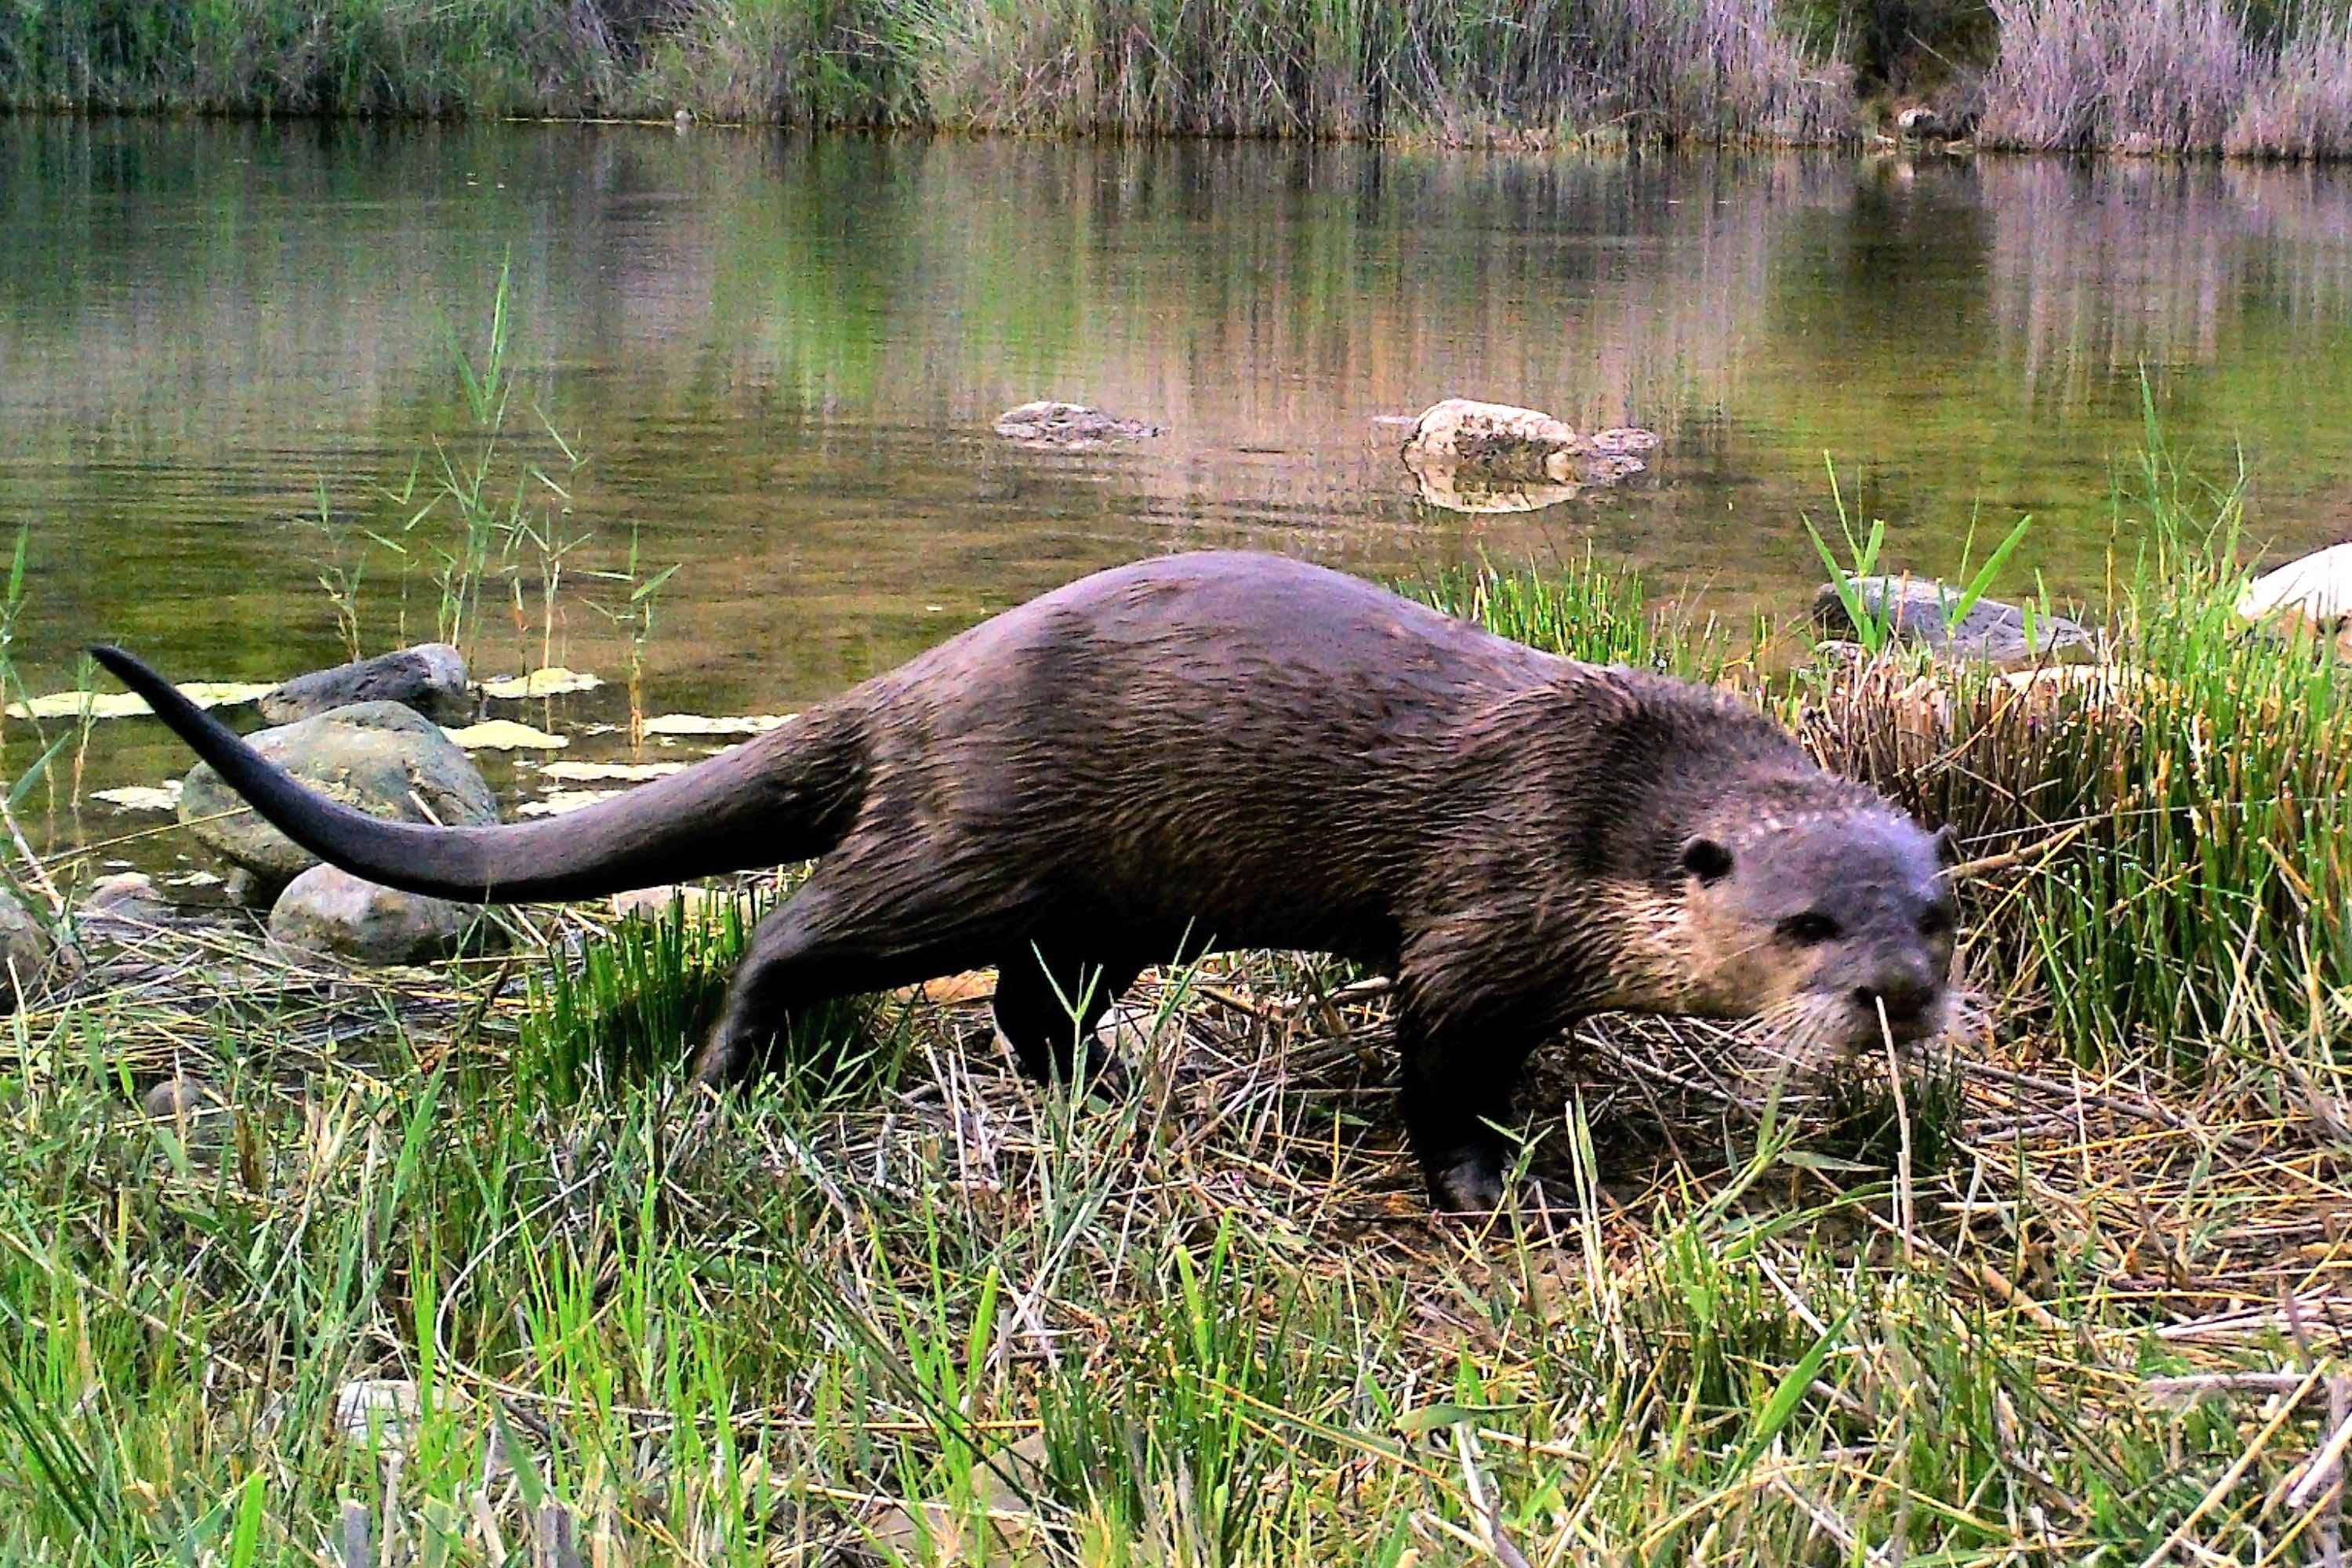 A cape clawless otter.